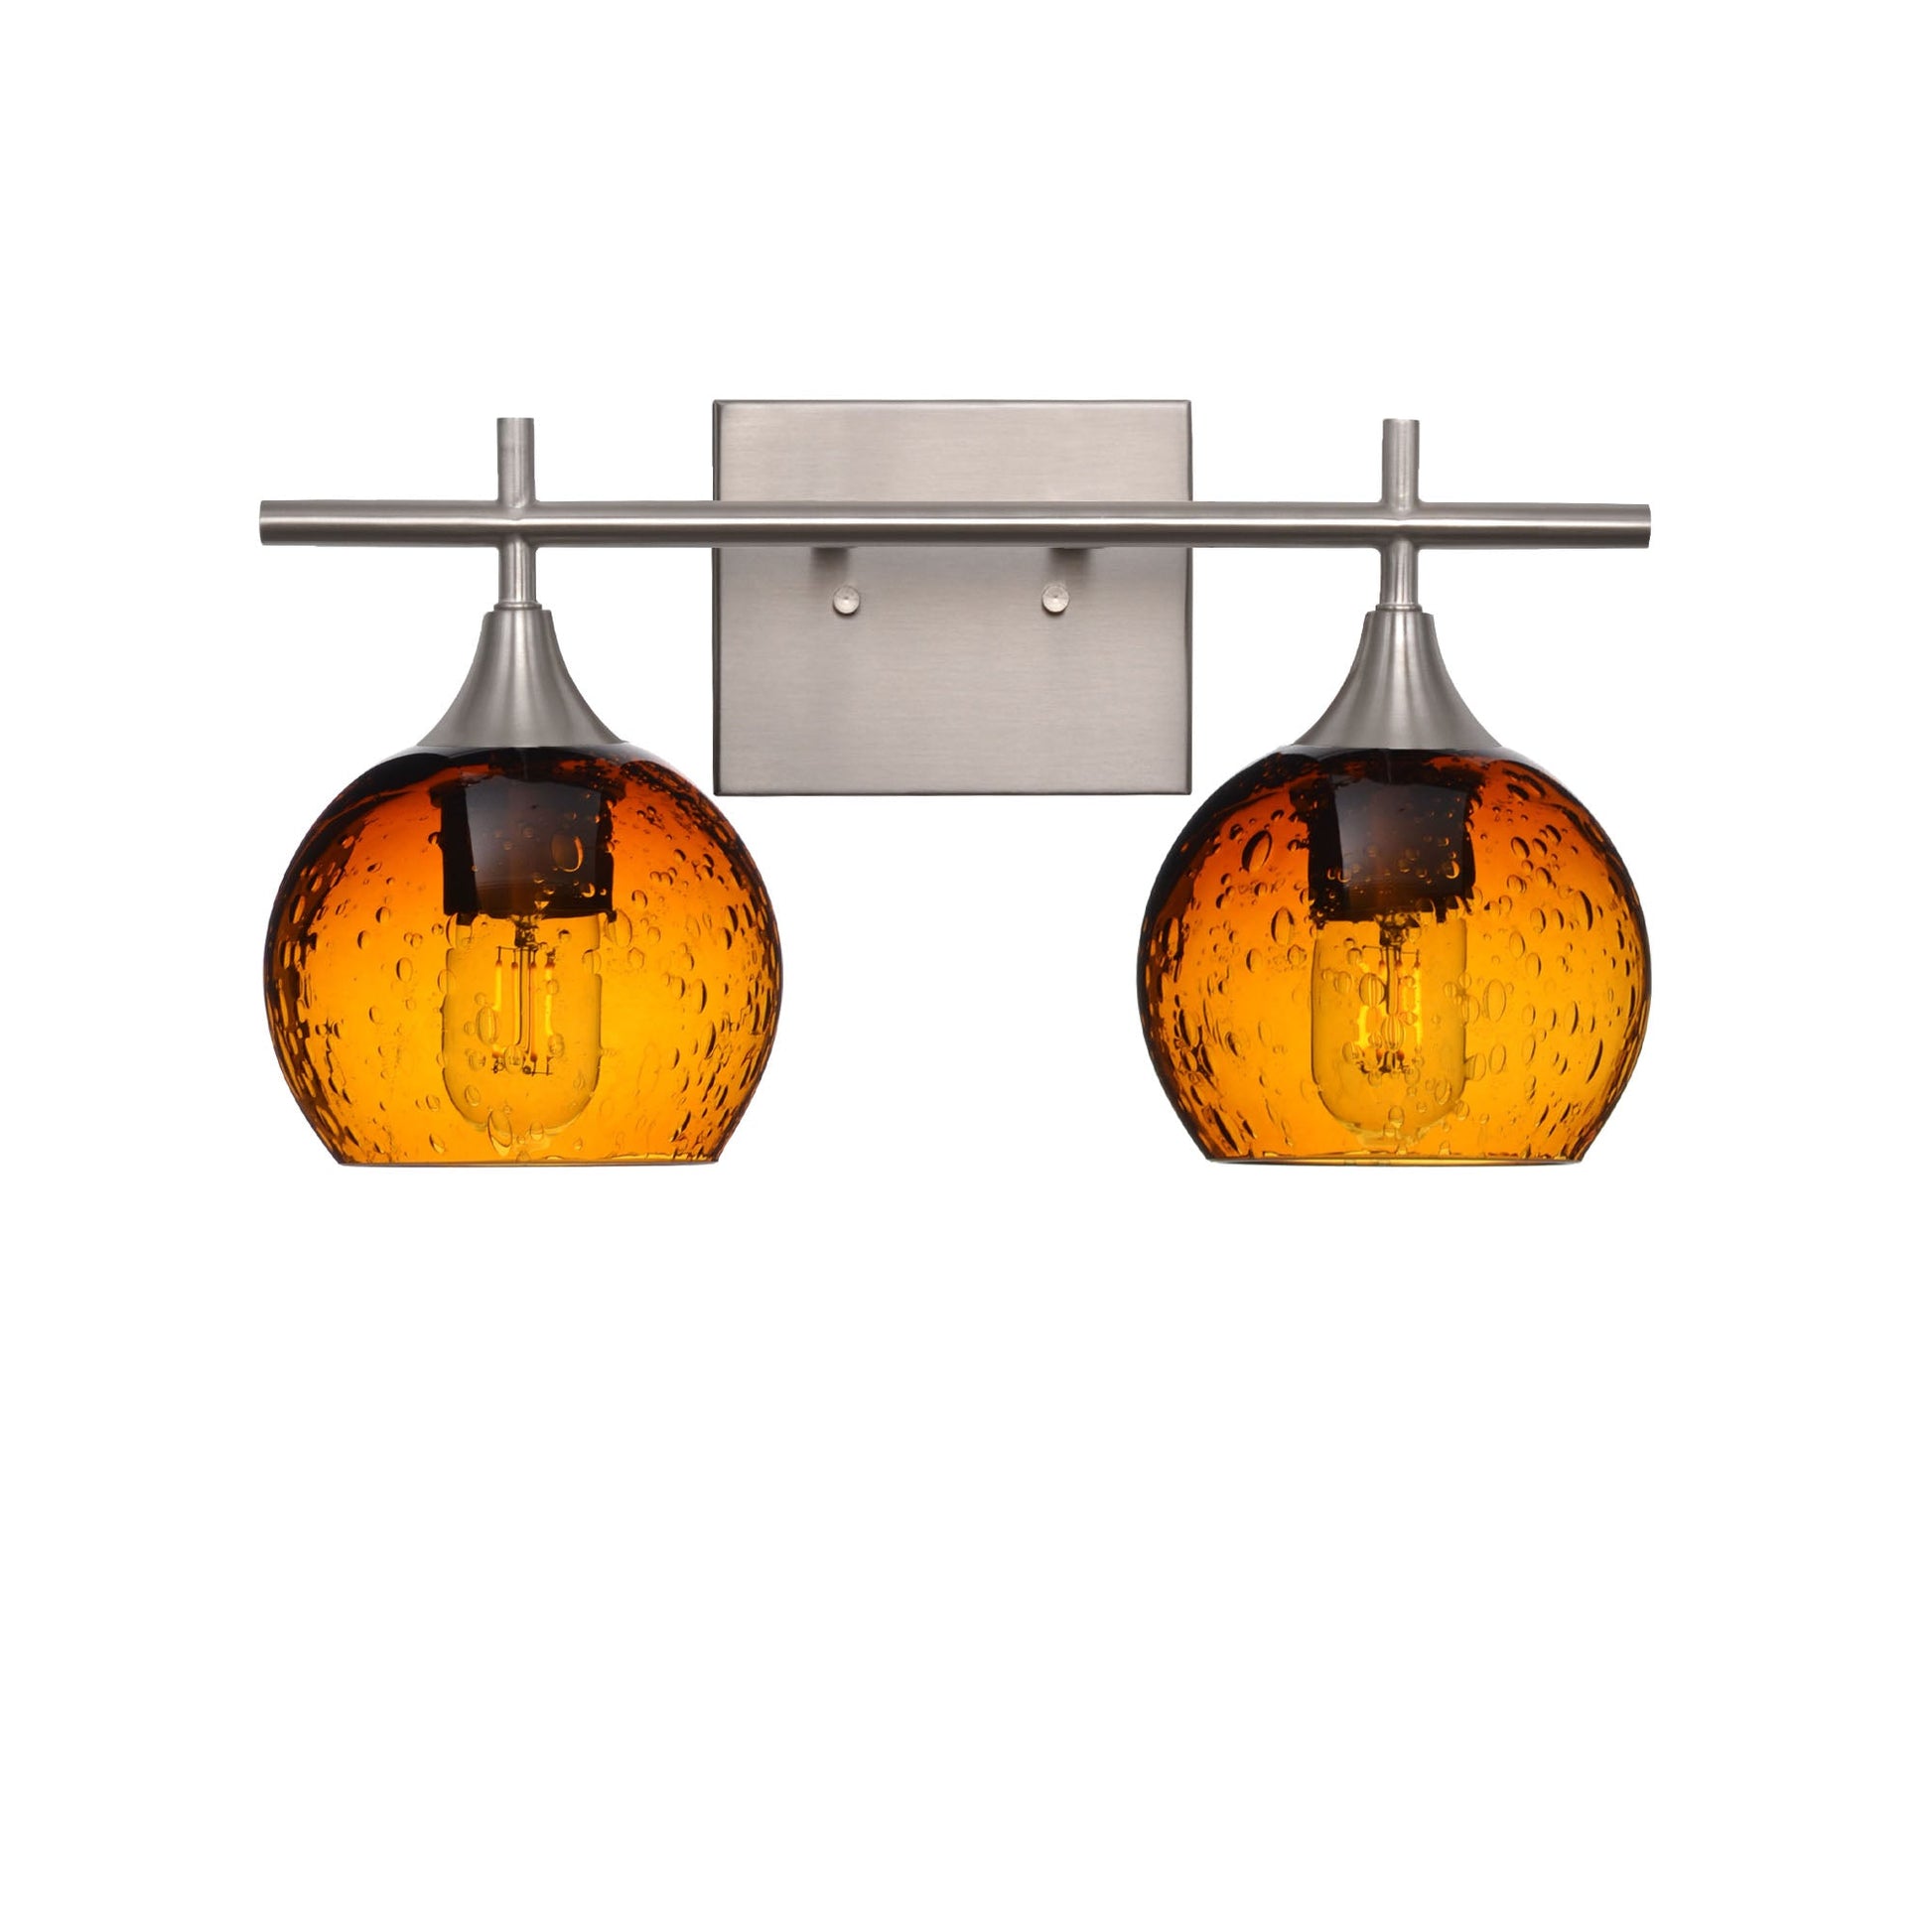 763 Lunar: 2 Light Wall Vanity-Glass-Bicycle Glass Co - Hotshop-Golden Amber-Brushed Nickel-Bicycle Glass Co